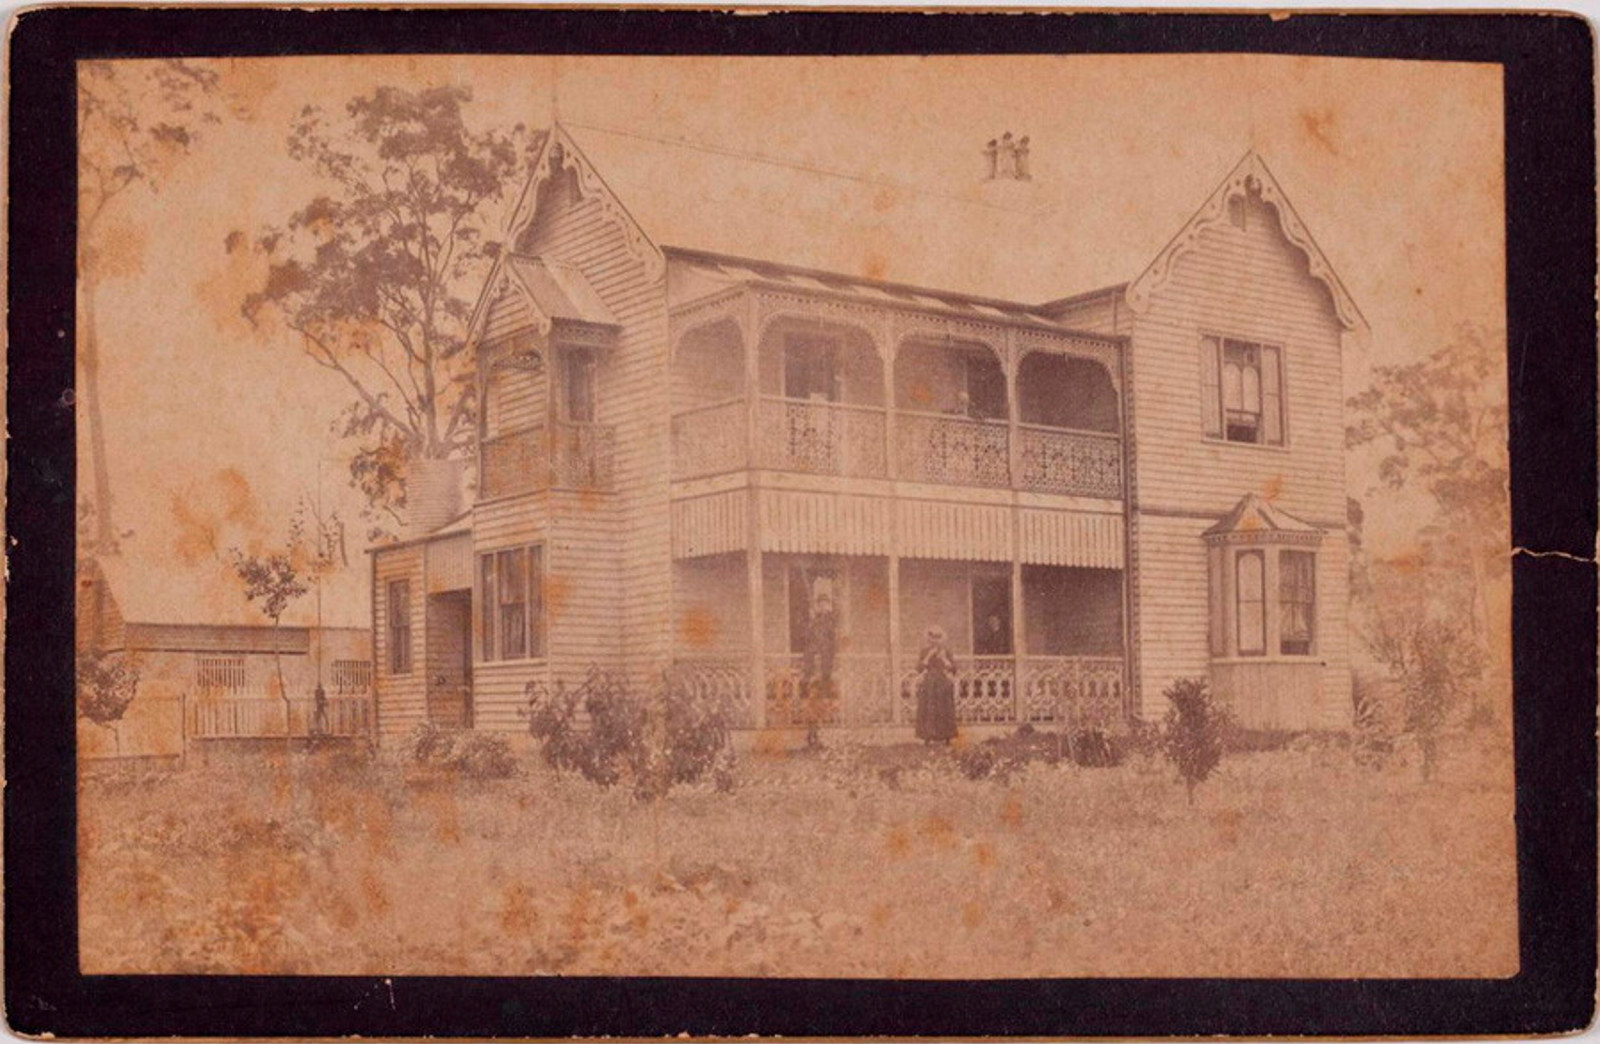 Photograph of exterior of house with three figures visible.